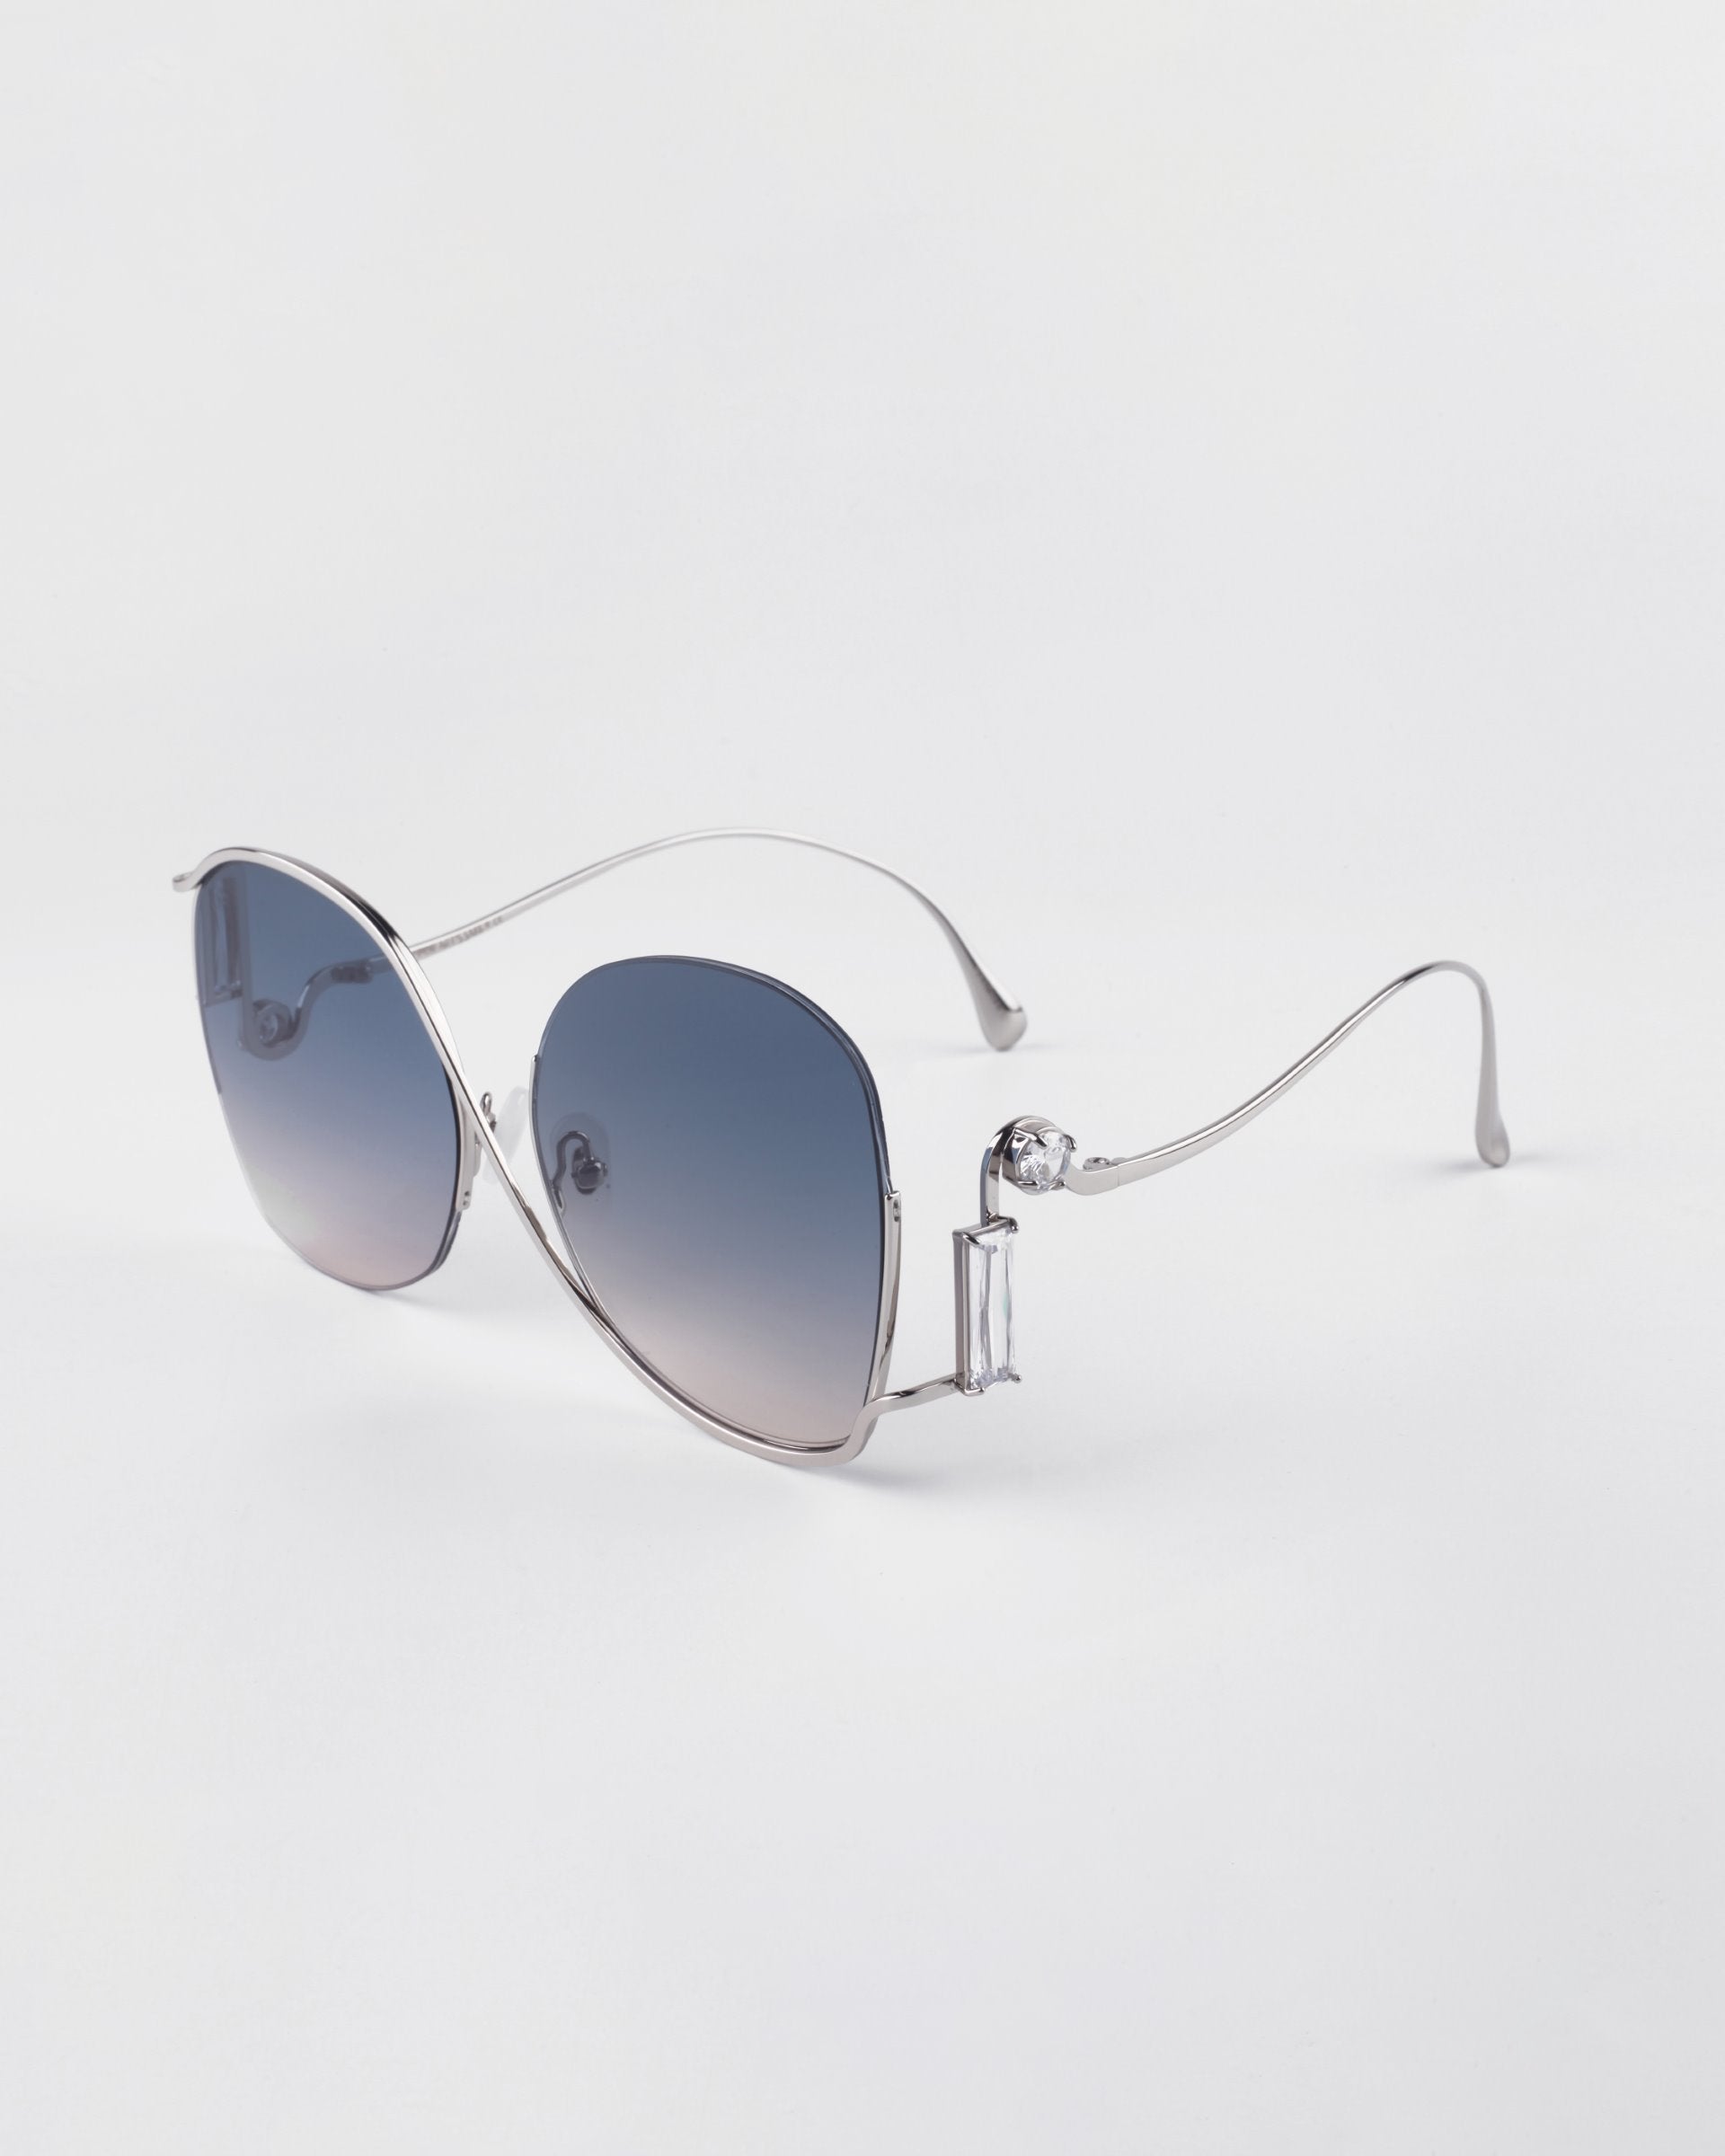 A pair of luxurious silver-framed Sapphire sunglasses from For Art's Sake® with dark gradient lenses is displayed against a plain white background. The sunglasses have a sleek, modern design with thin temples and slightly oversized lenses, offering exceptional UV protection for your eyes.